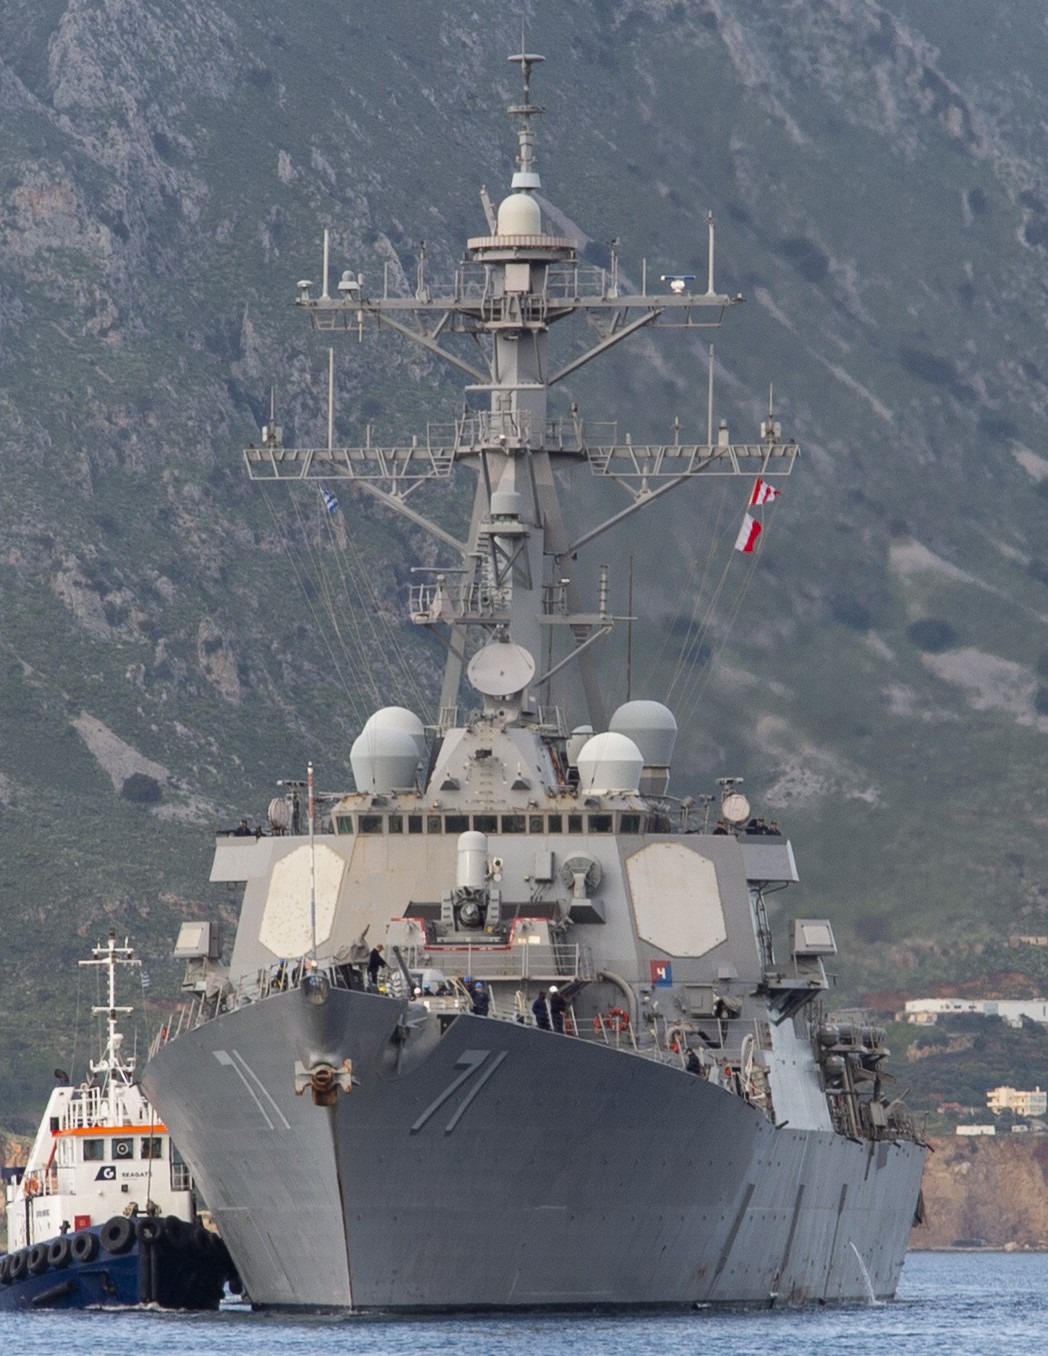 ddg-71 uss ross guided missile destroyer arleigh burke class aegis bmd 14